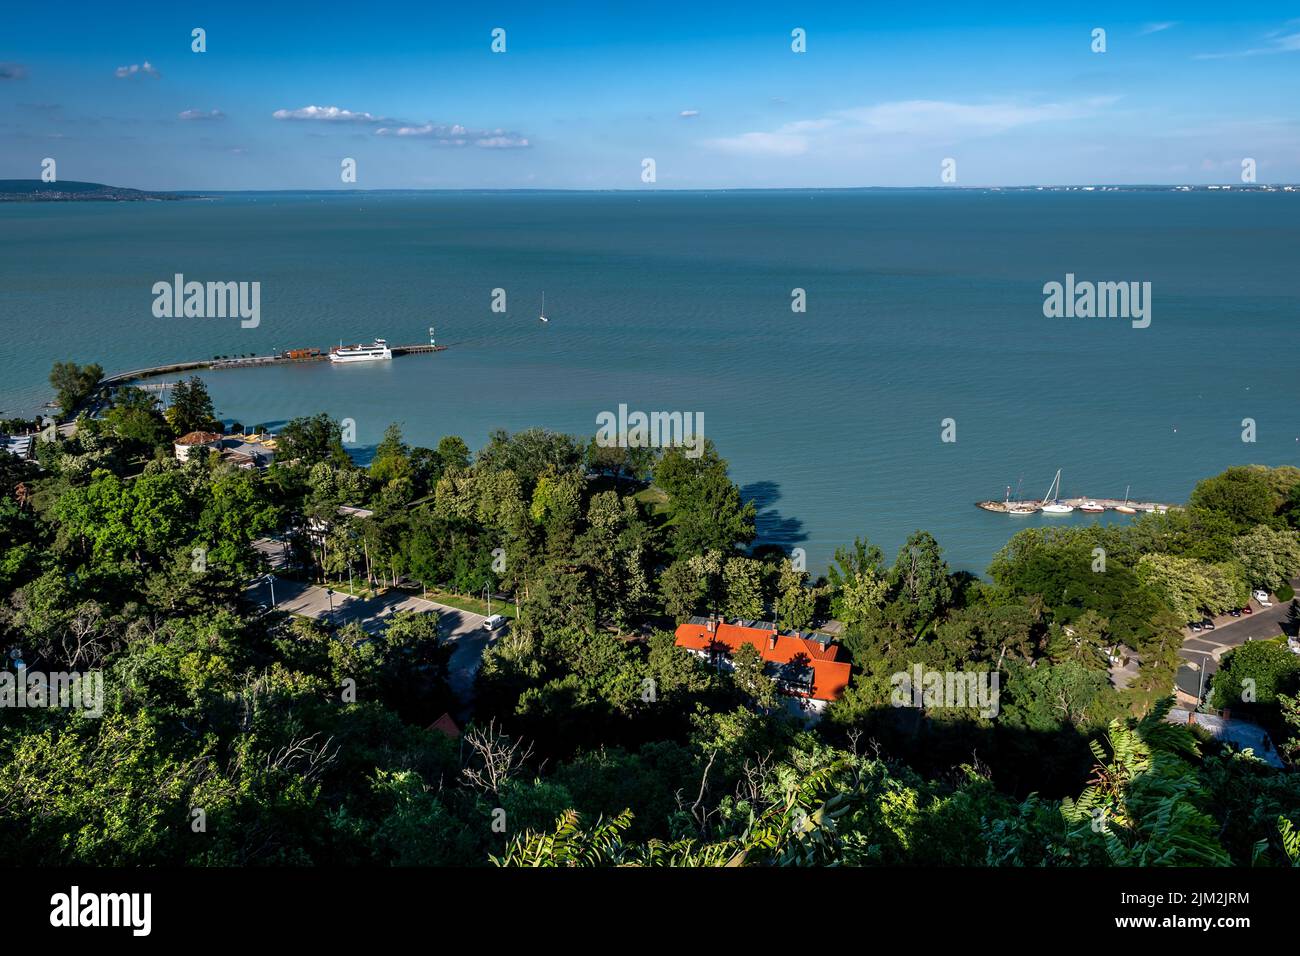 Panorama Of Picturesque Lake Balaton With Sail Boats In Hungary Stock Photo  - Alamy